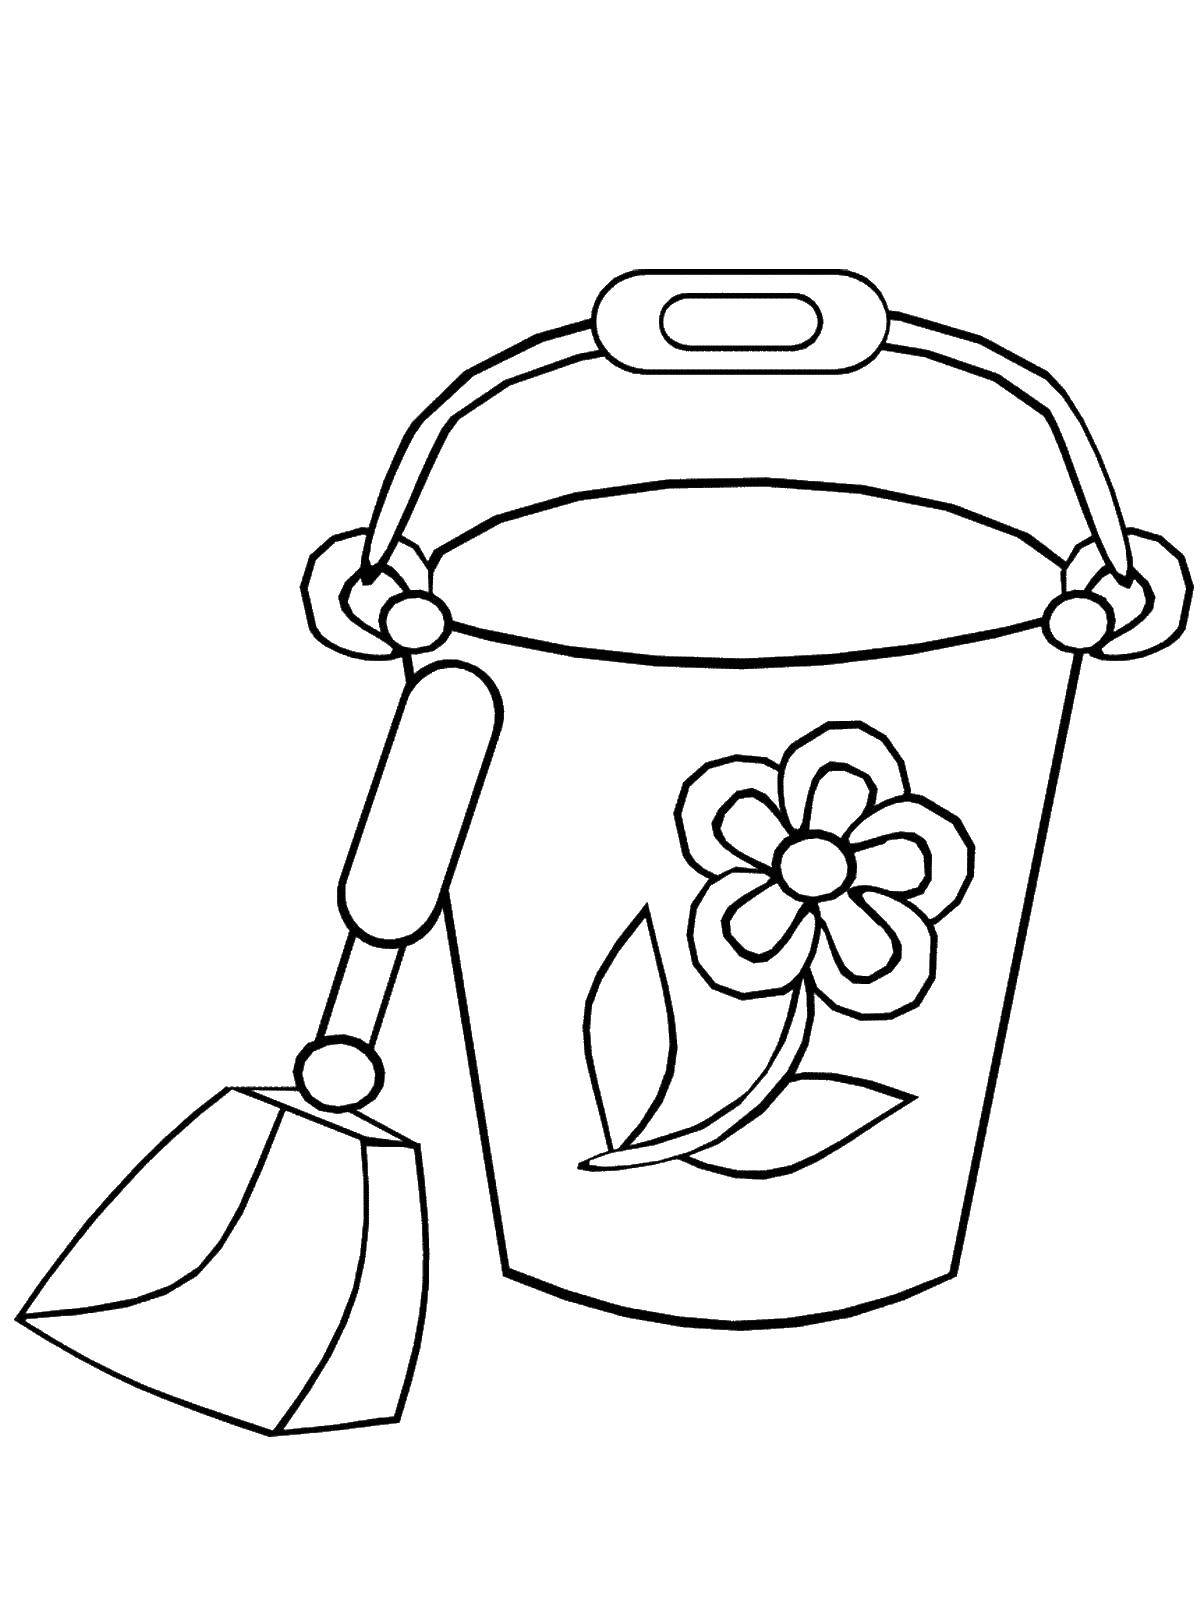 Coloring Pail with shovel. Category toys. Tags:  bucket, shovel, flower.